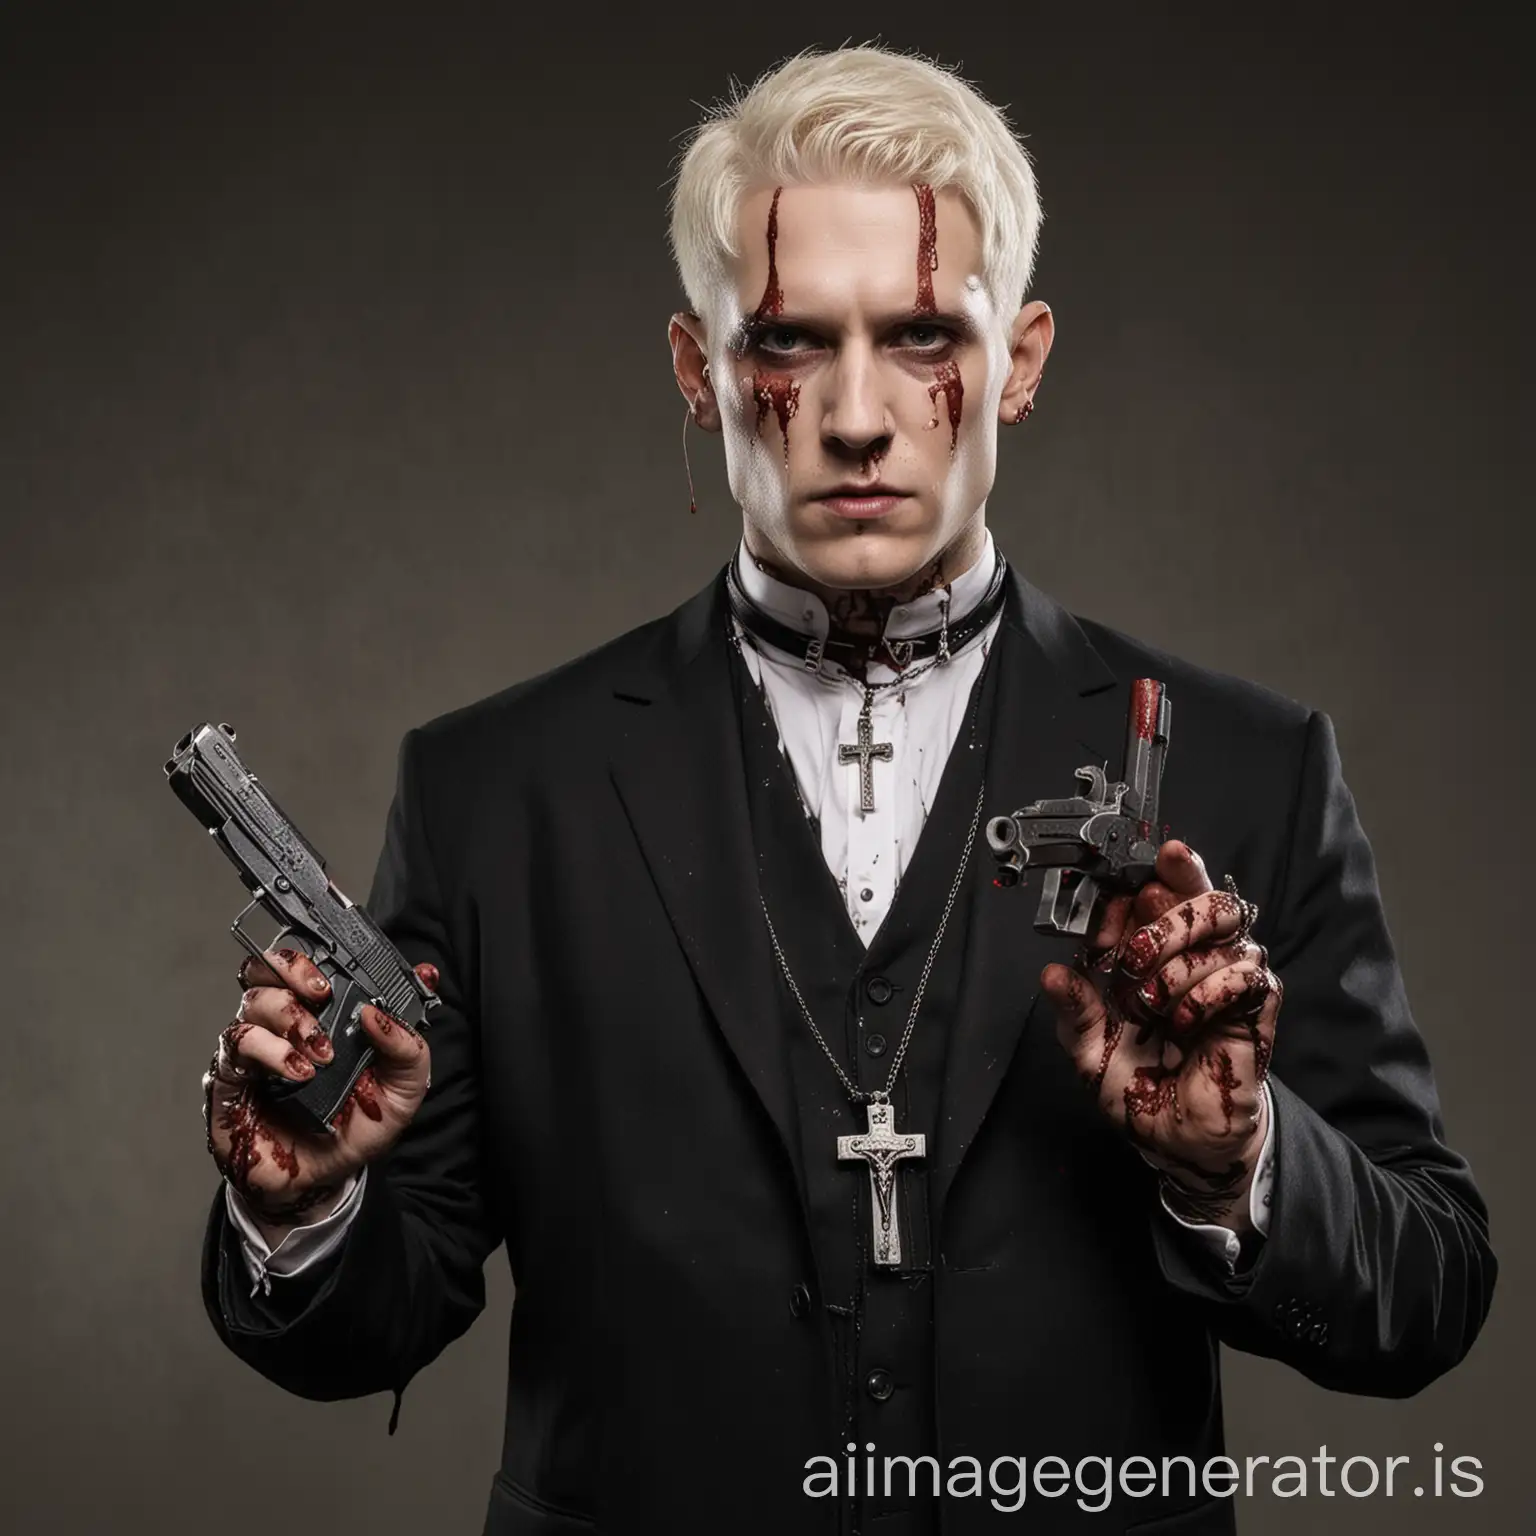 Christian-Figure-Holding-Bloodied-Cross-and-Pistol